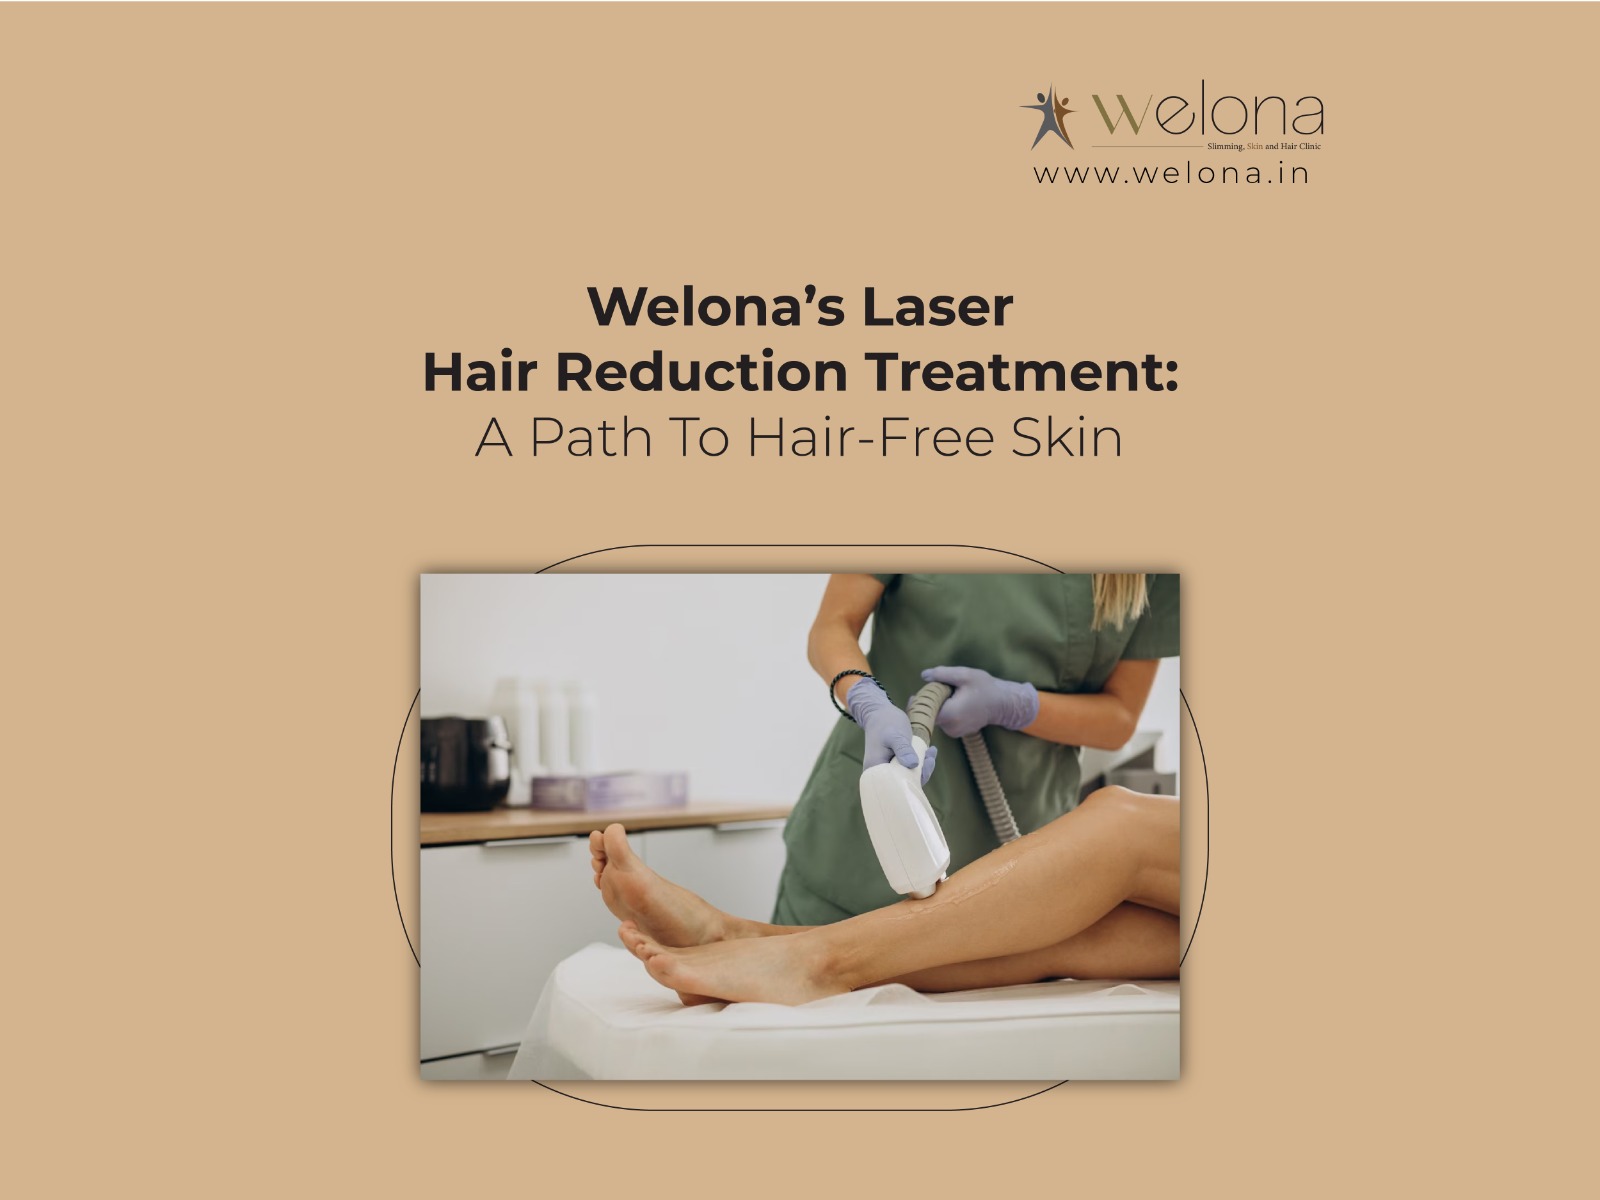 Laser Hair Reduction Treatment by Welona: A Path To Hair-Free Skin